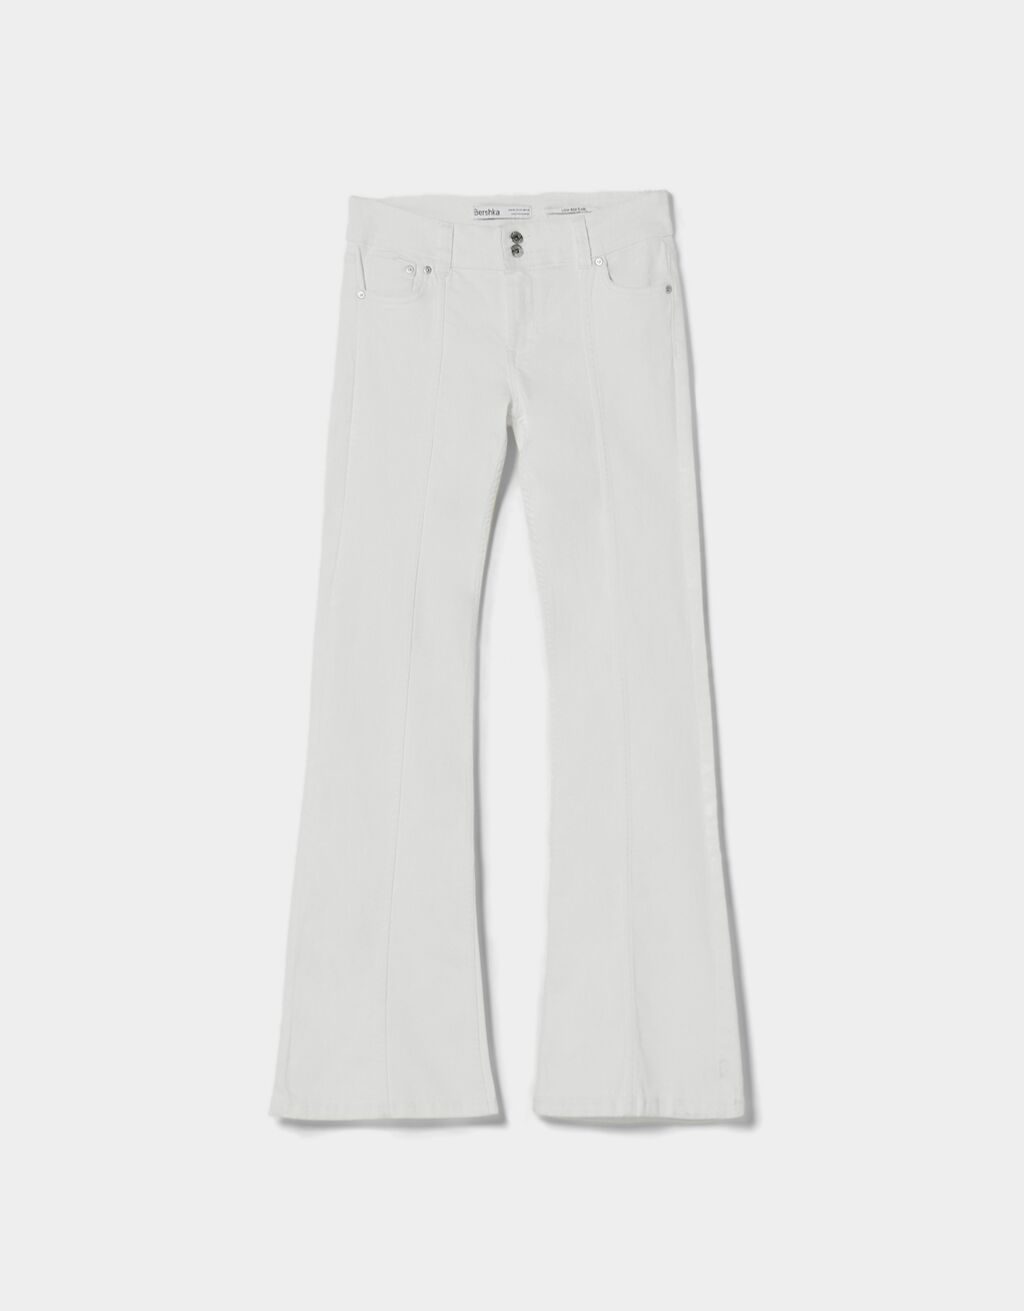 Low-rise flared twill pants